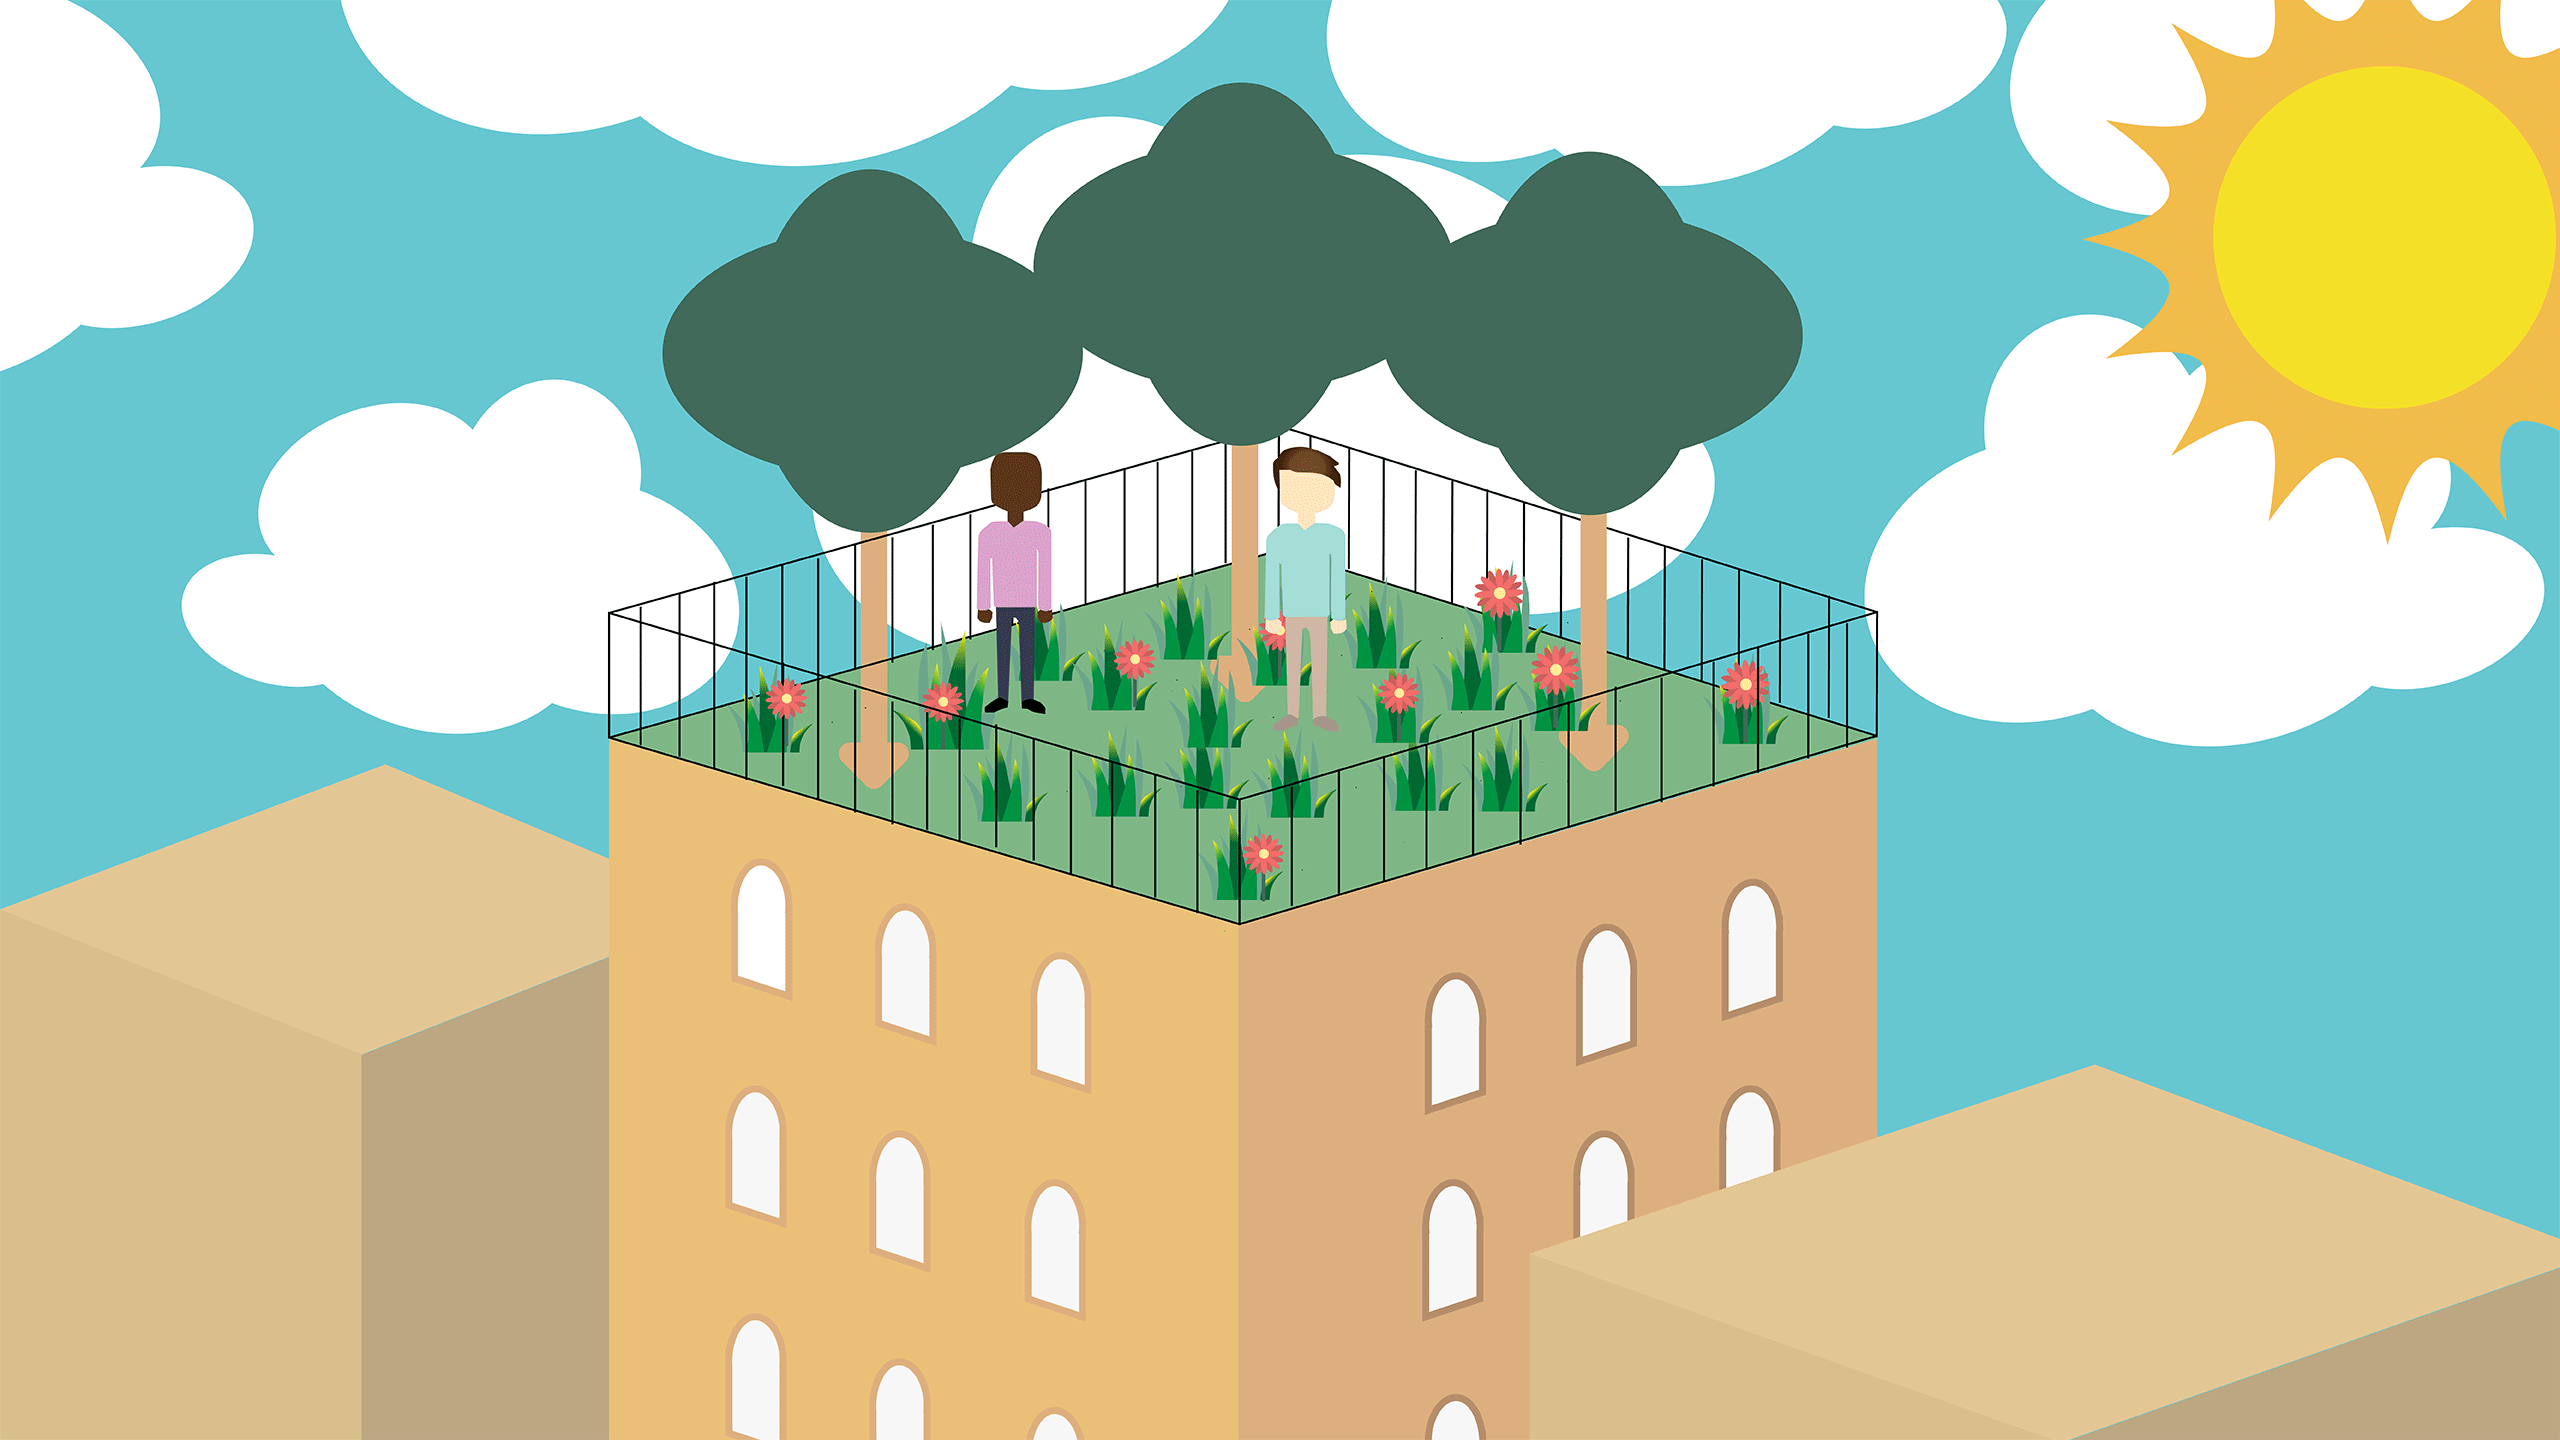 Illustration of a rooftop with plants, vegetation and people on top.